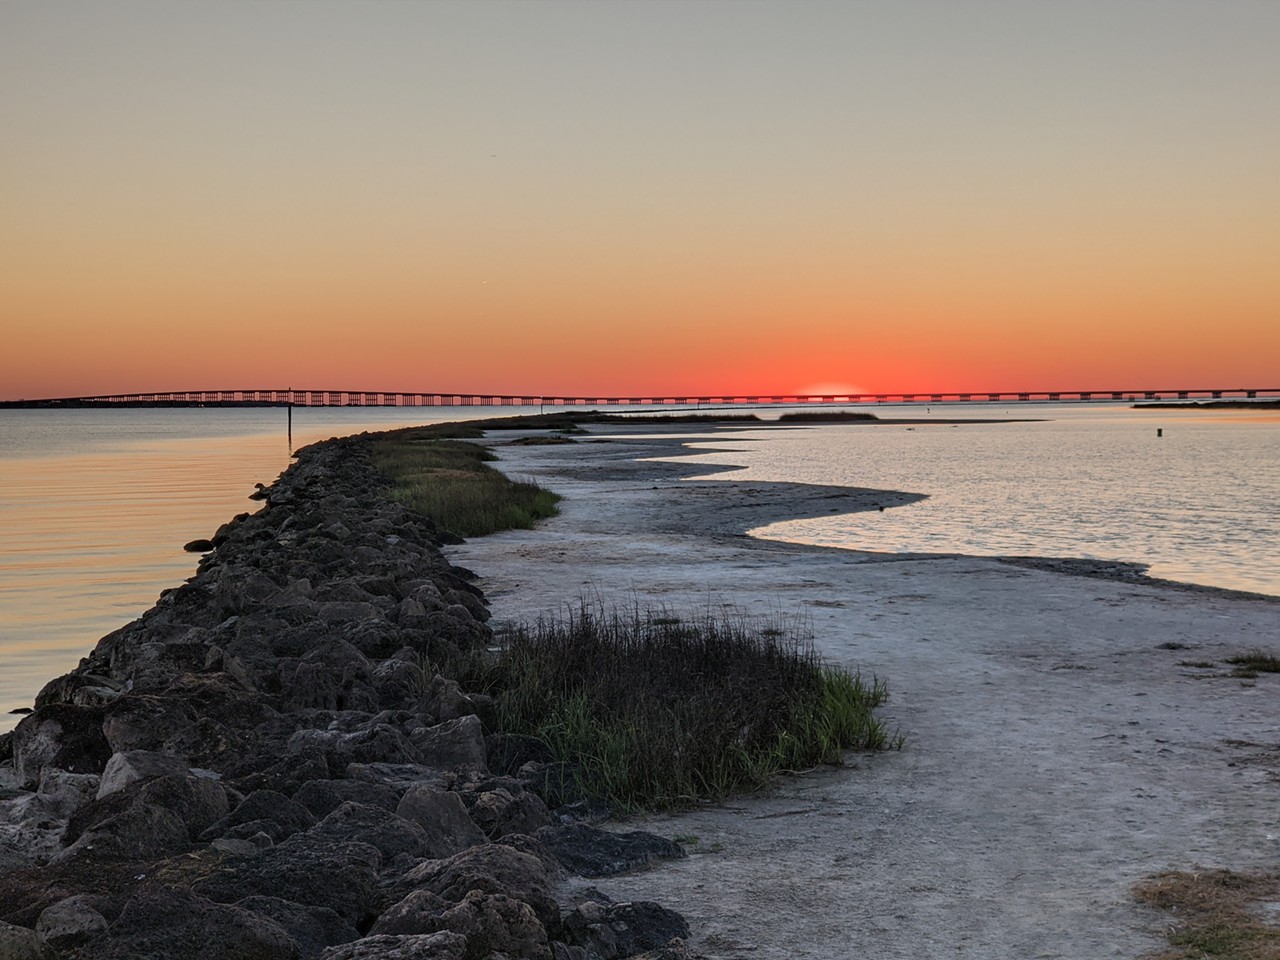 Goose Island State Park
202 S. Palmetto St, (361) 729-2858, tpwd.texas.gov
Set up a picnic or even pitch a tent for the night under the shade of the park’s live oaks. Just north of Corpus Christi, the park boasts great fishing, hiking, birdwatching and camping spots. The park is undergoing road construction this year, which may cause intermittent delays.